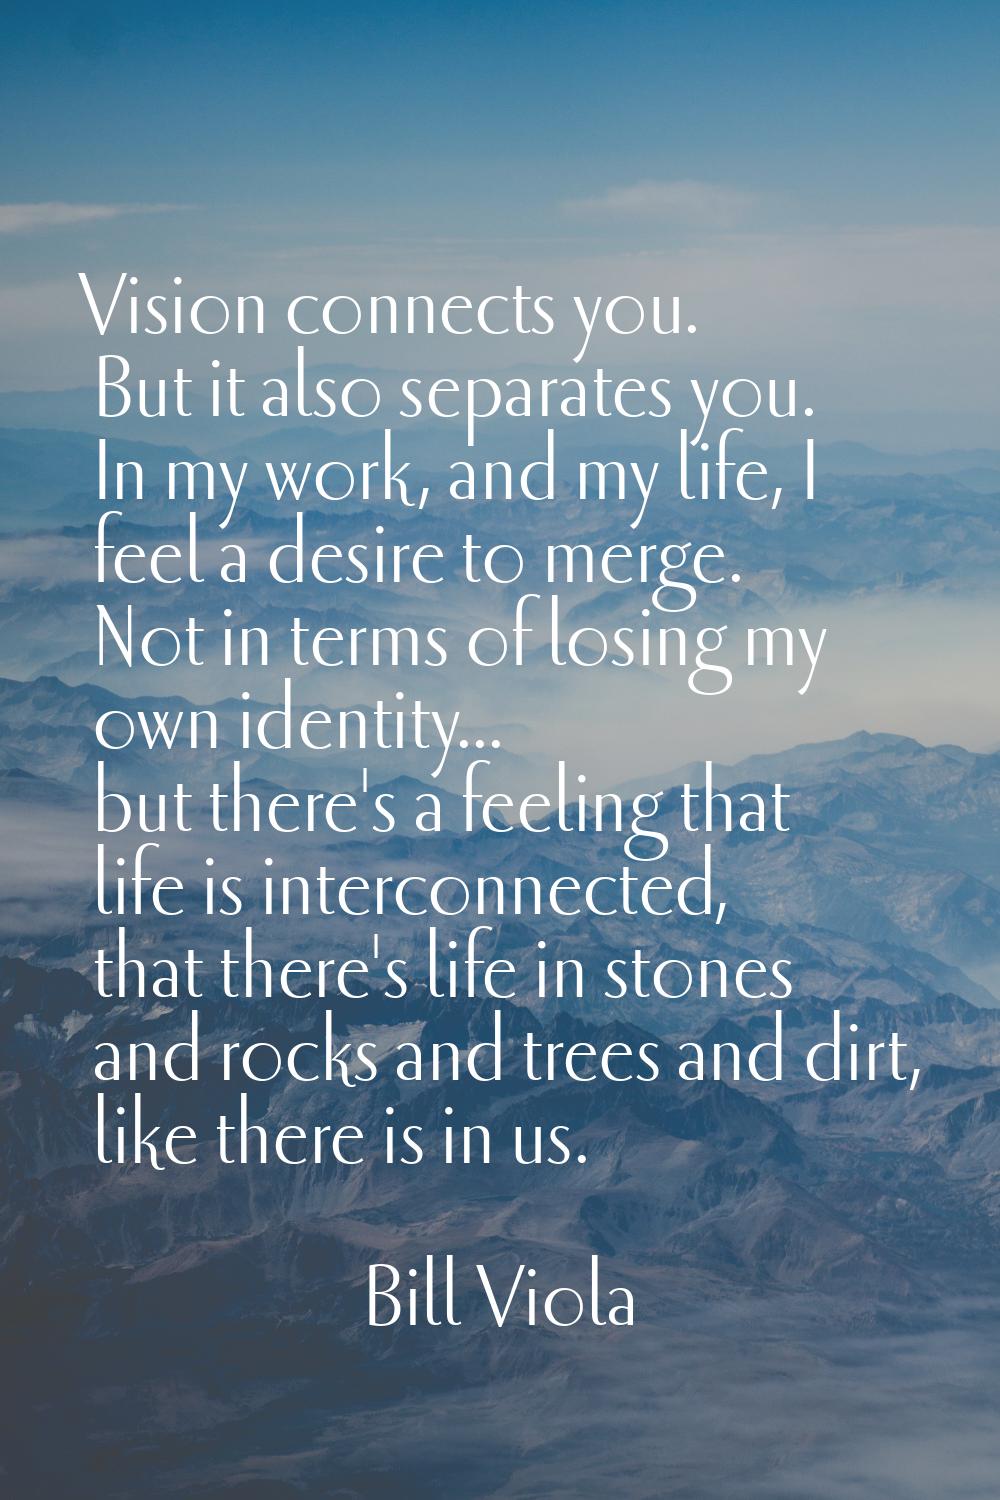 Vision connects you. But it also separates you. In my work, and my life, I feel a desire to merge. 